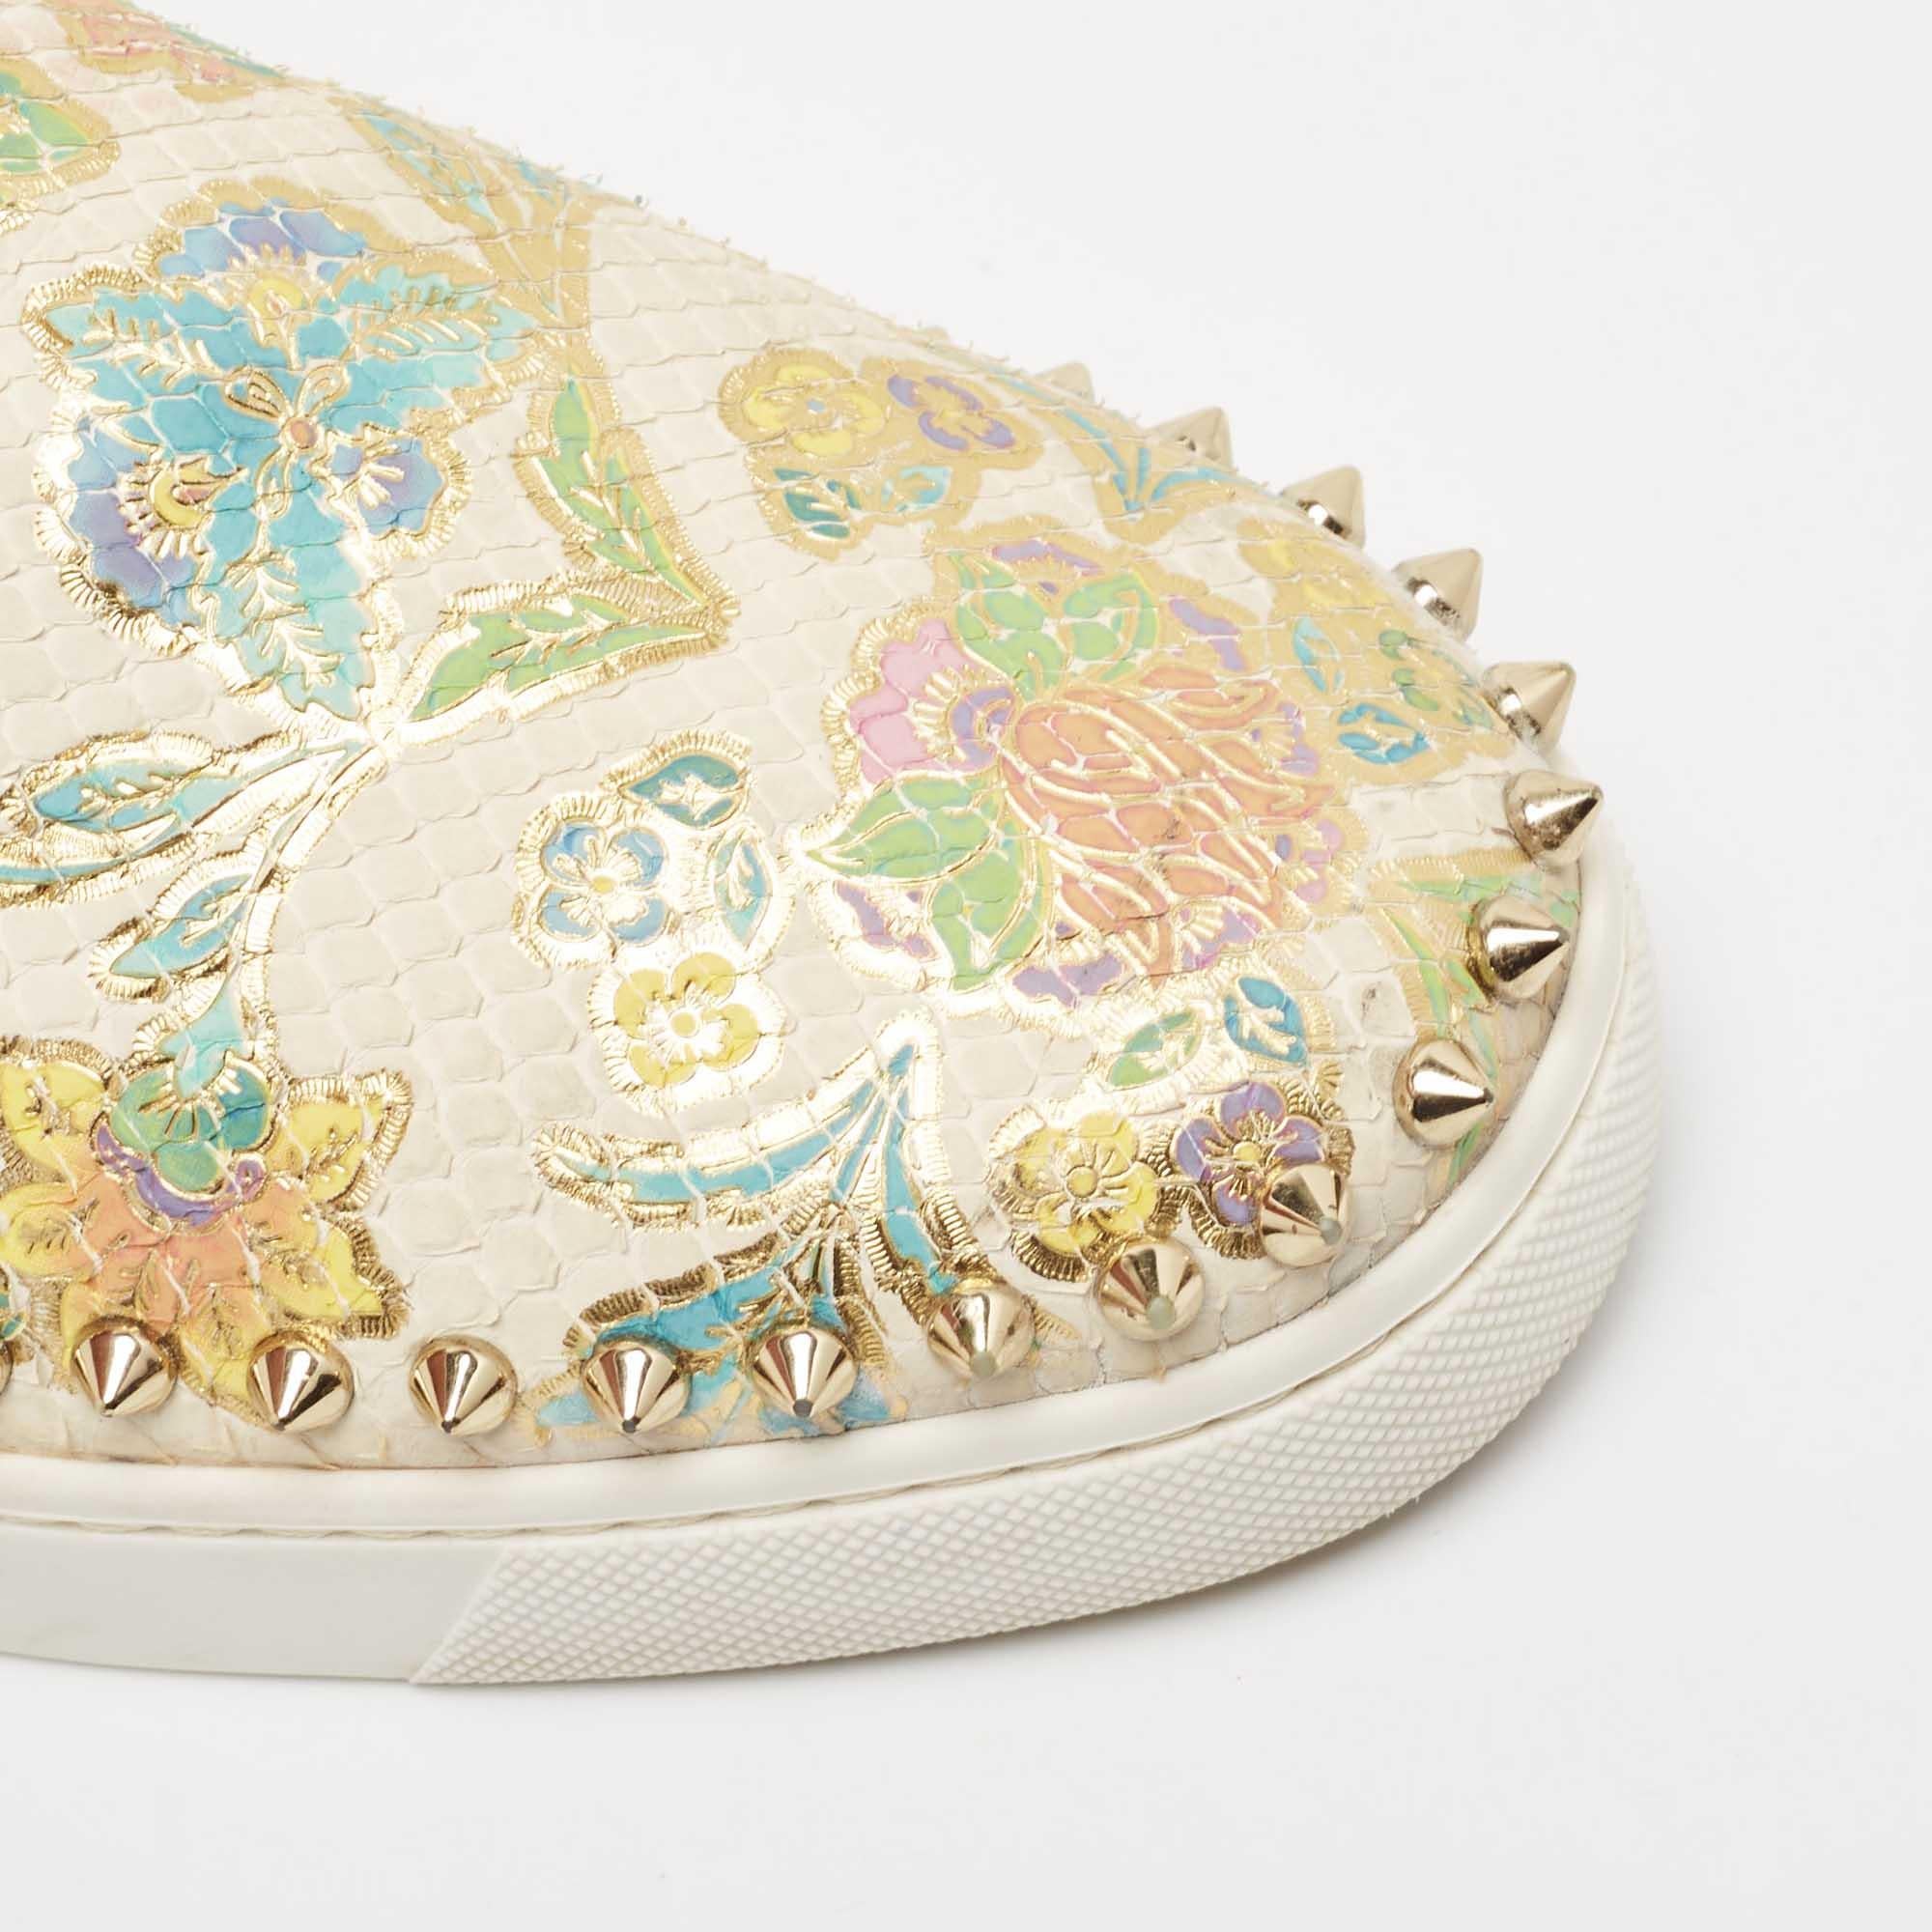 Christian Louboutin Floral Print Embossed Snakeskin Pik Boat Sneakers Size 38.5 For Sale 3